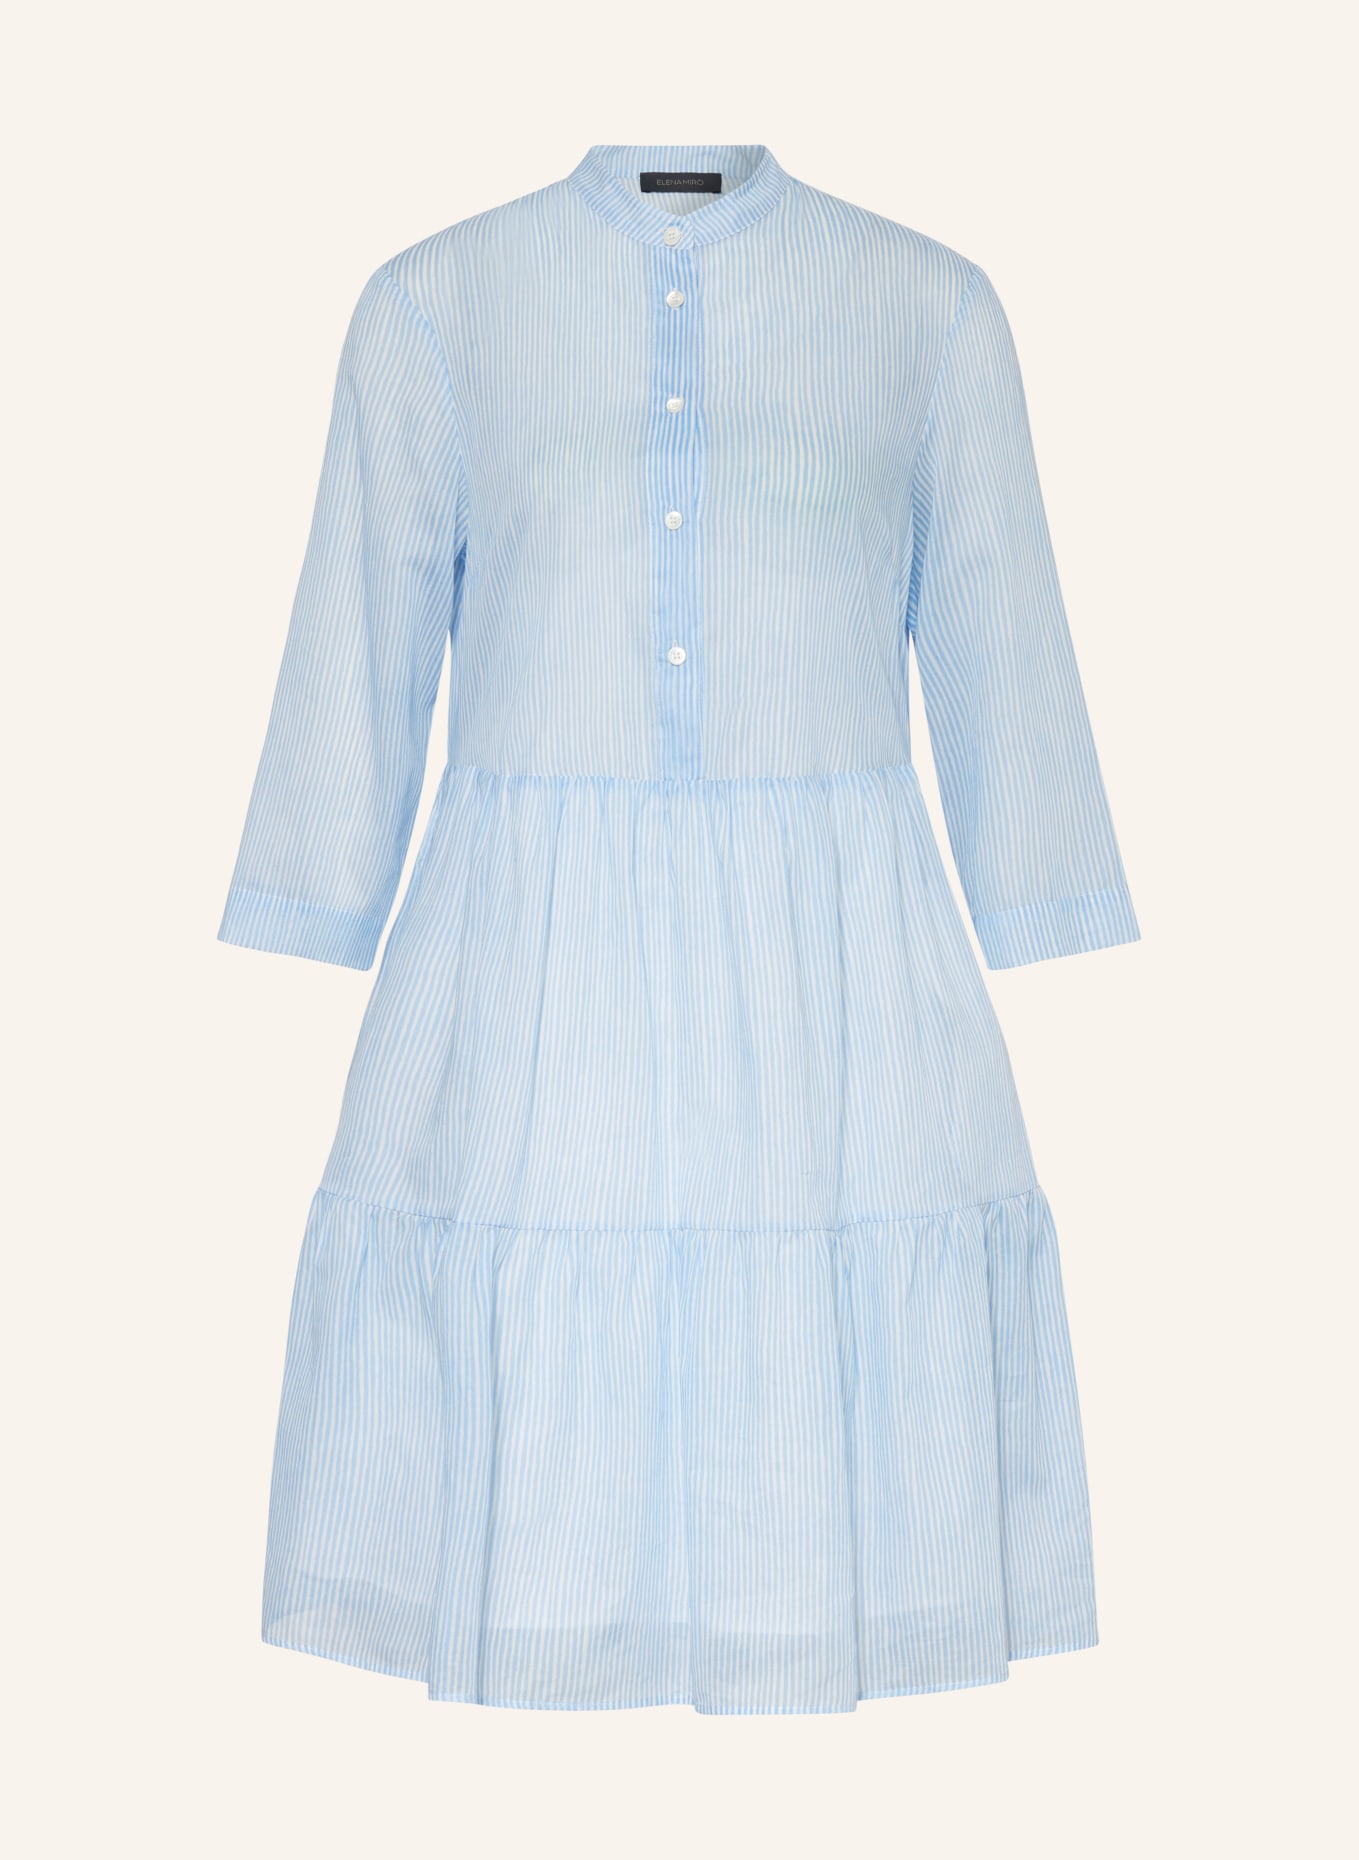 ELENA MIRO Dress with 3/4 sleeves, Color: LIGHT BLUE/ WHITE (Image 1)